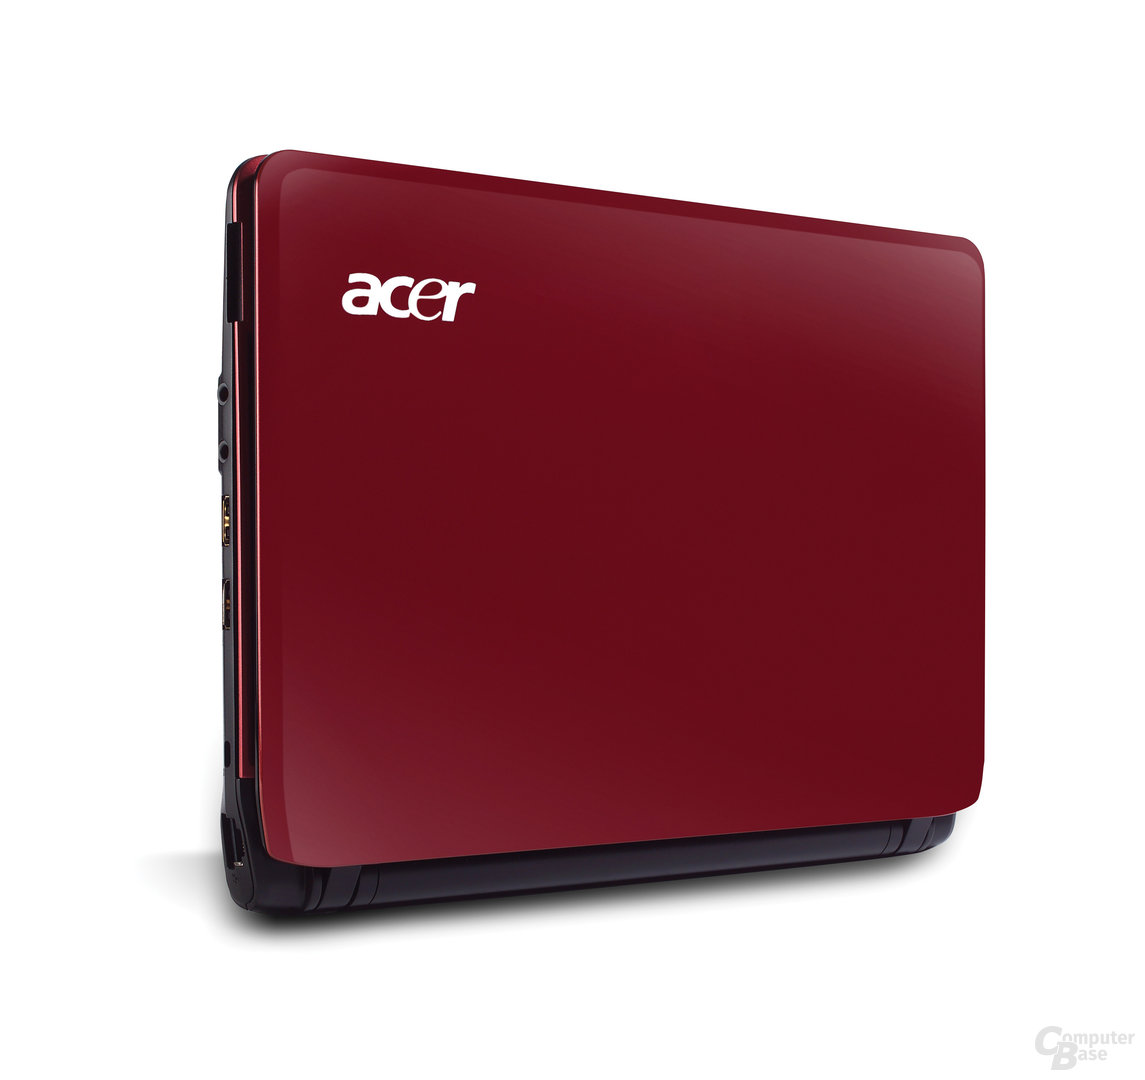 Acer Aspire 1810T in rot